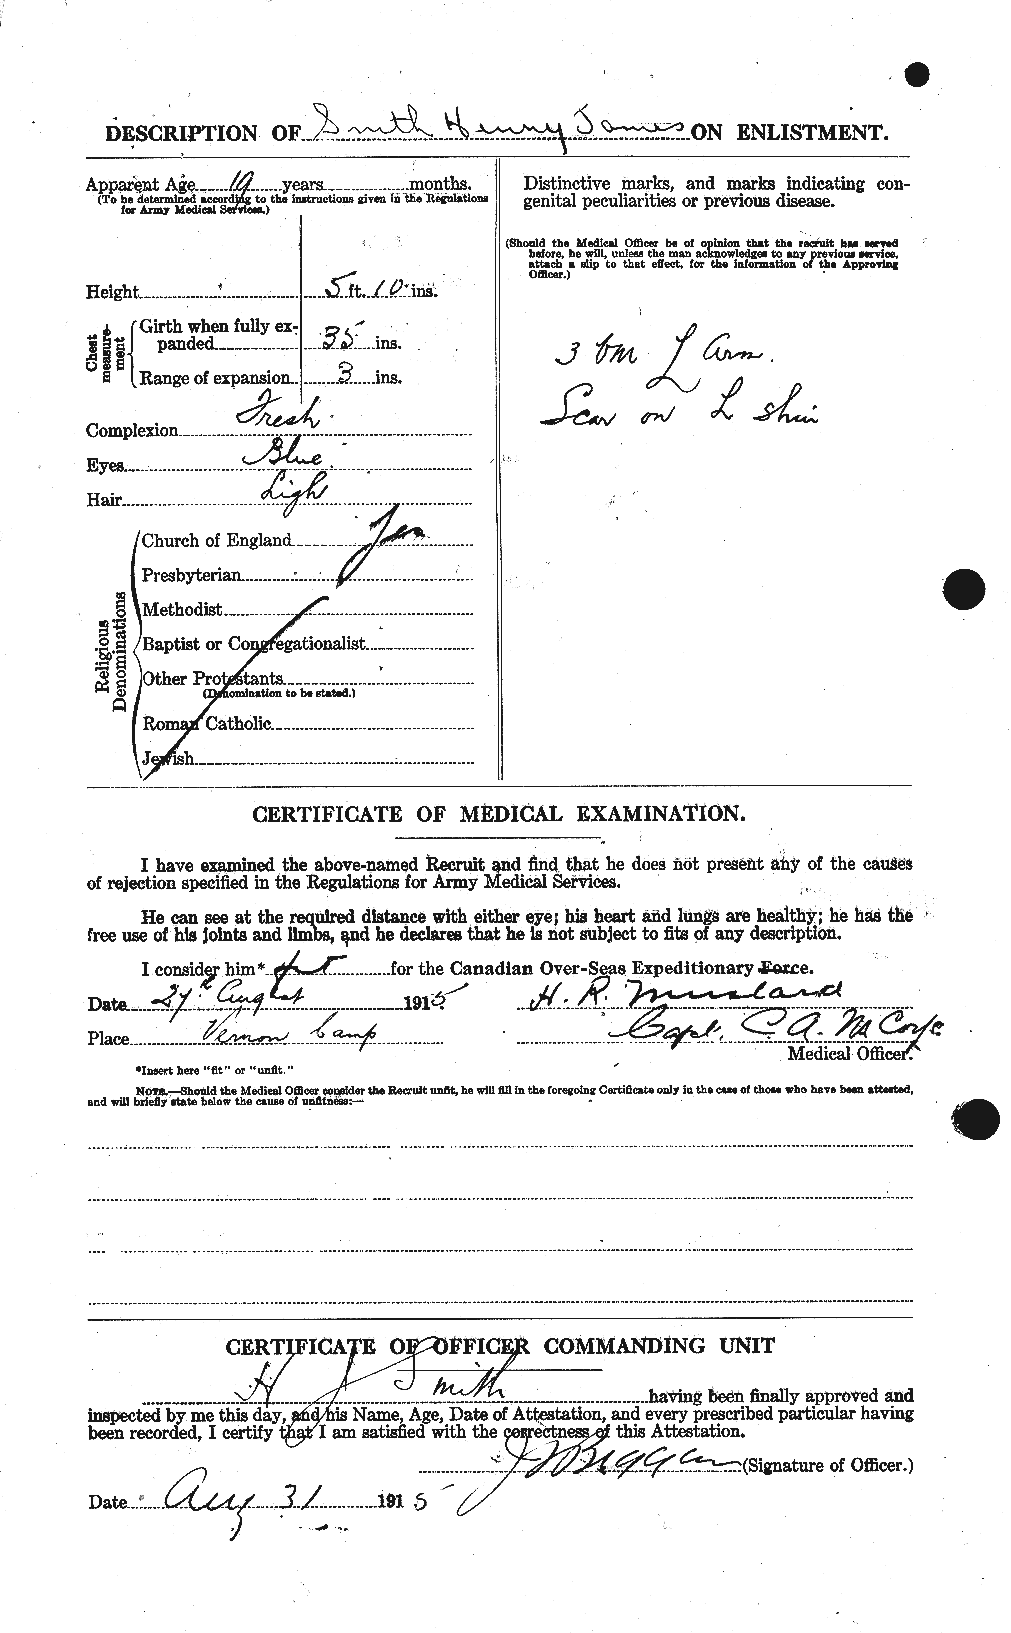 Personnel Records of the First World War - CEF 104698b